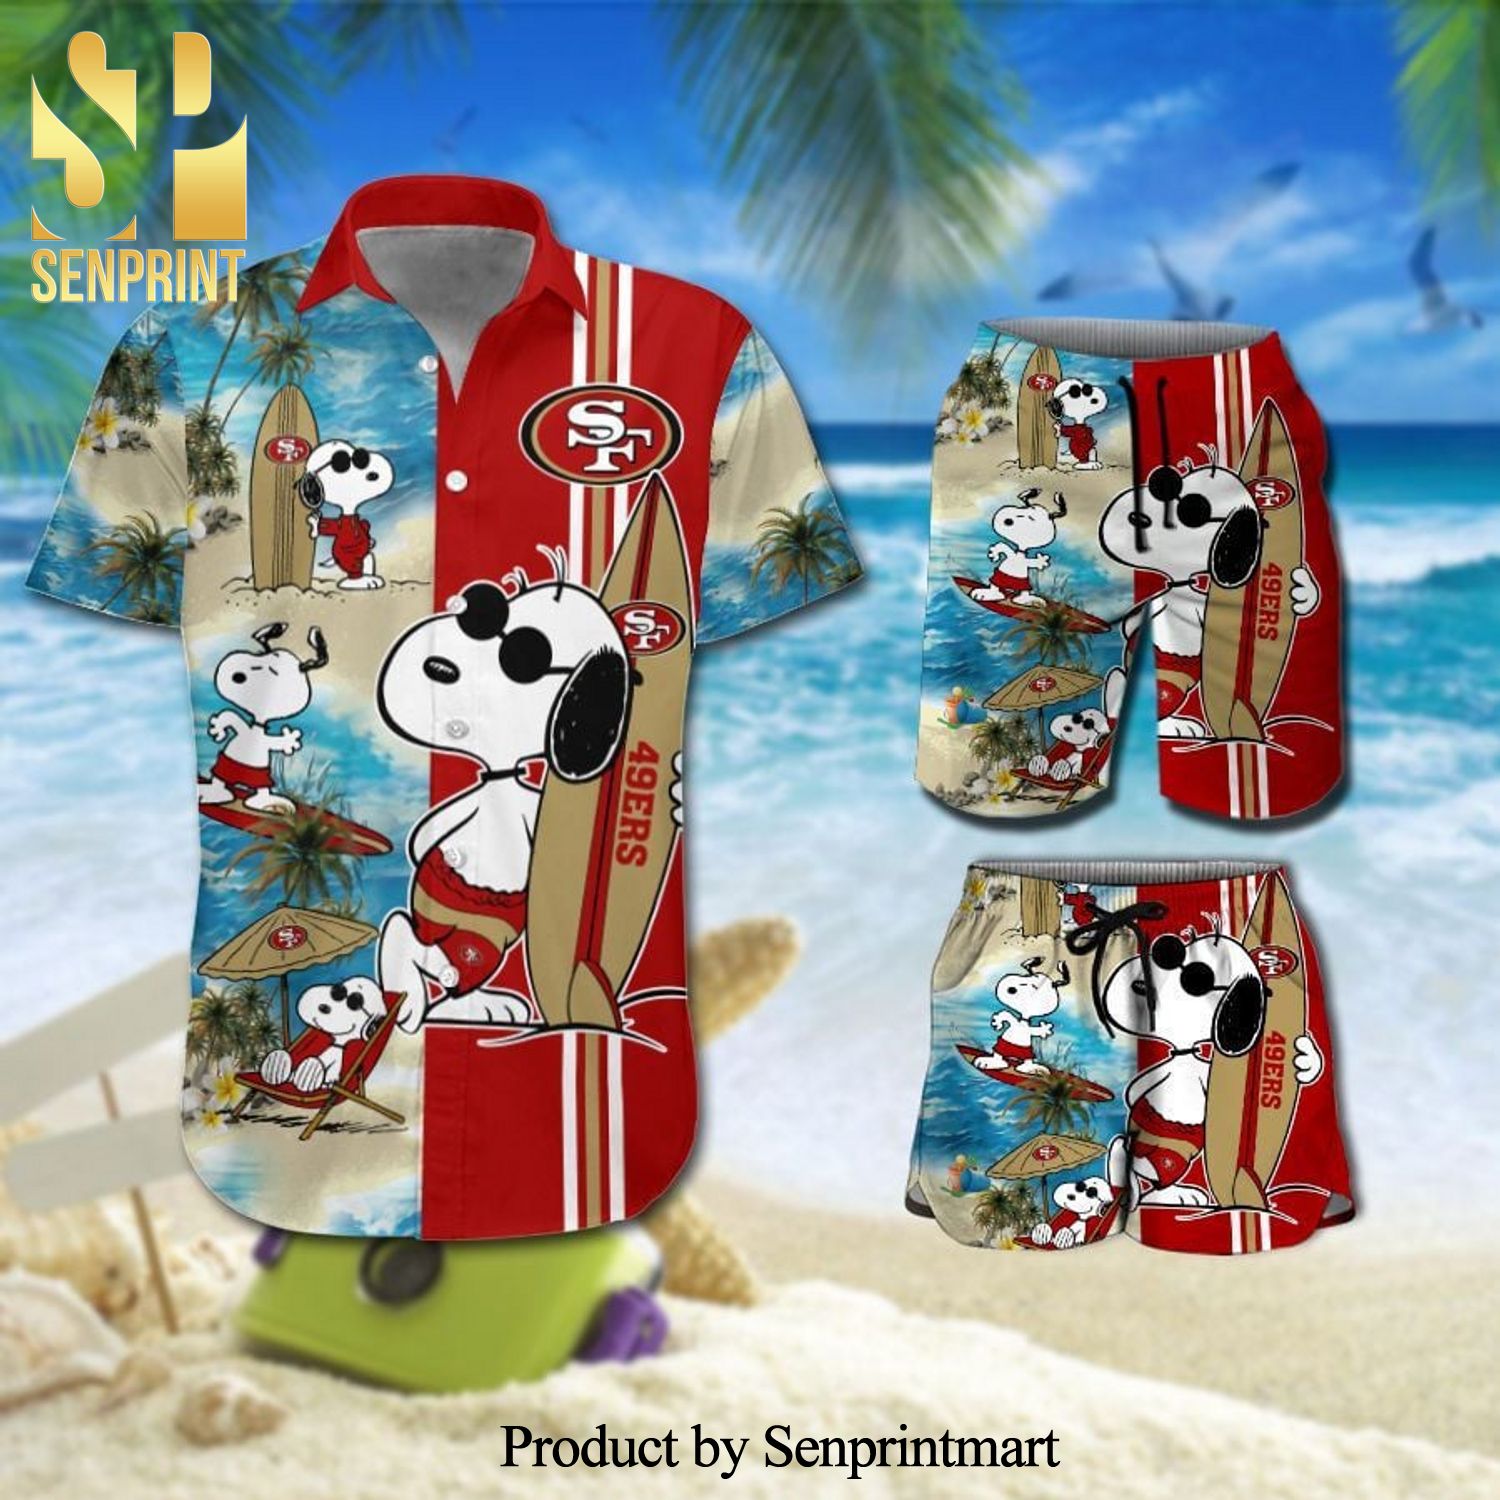 San Francisco 49Ers Snoopy Surfing On The Beach Full Printing Combo Hawaiian Shirt And Beach Shorts – Red